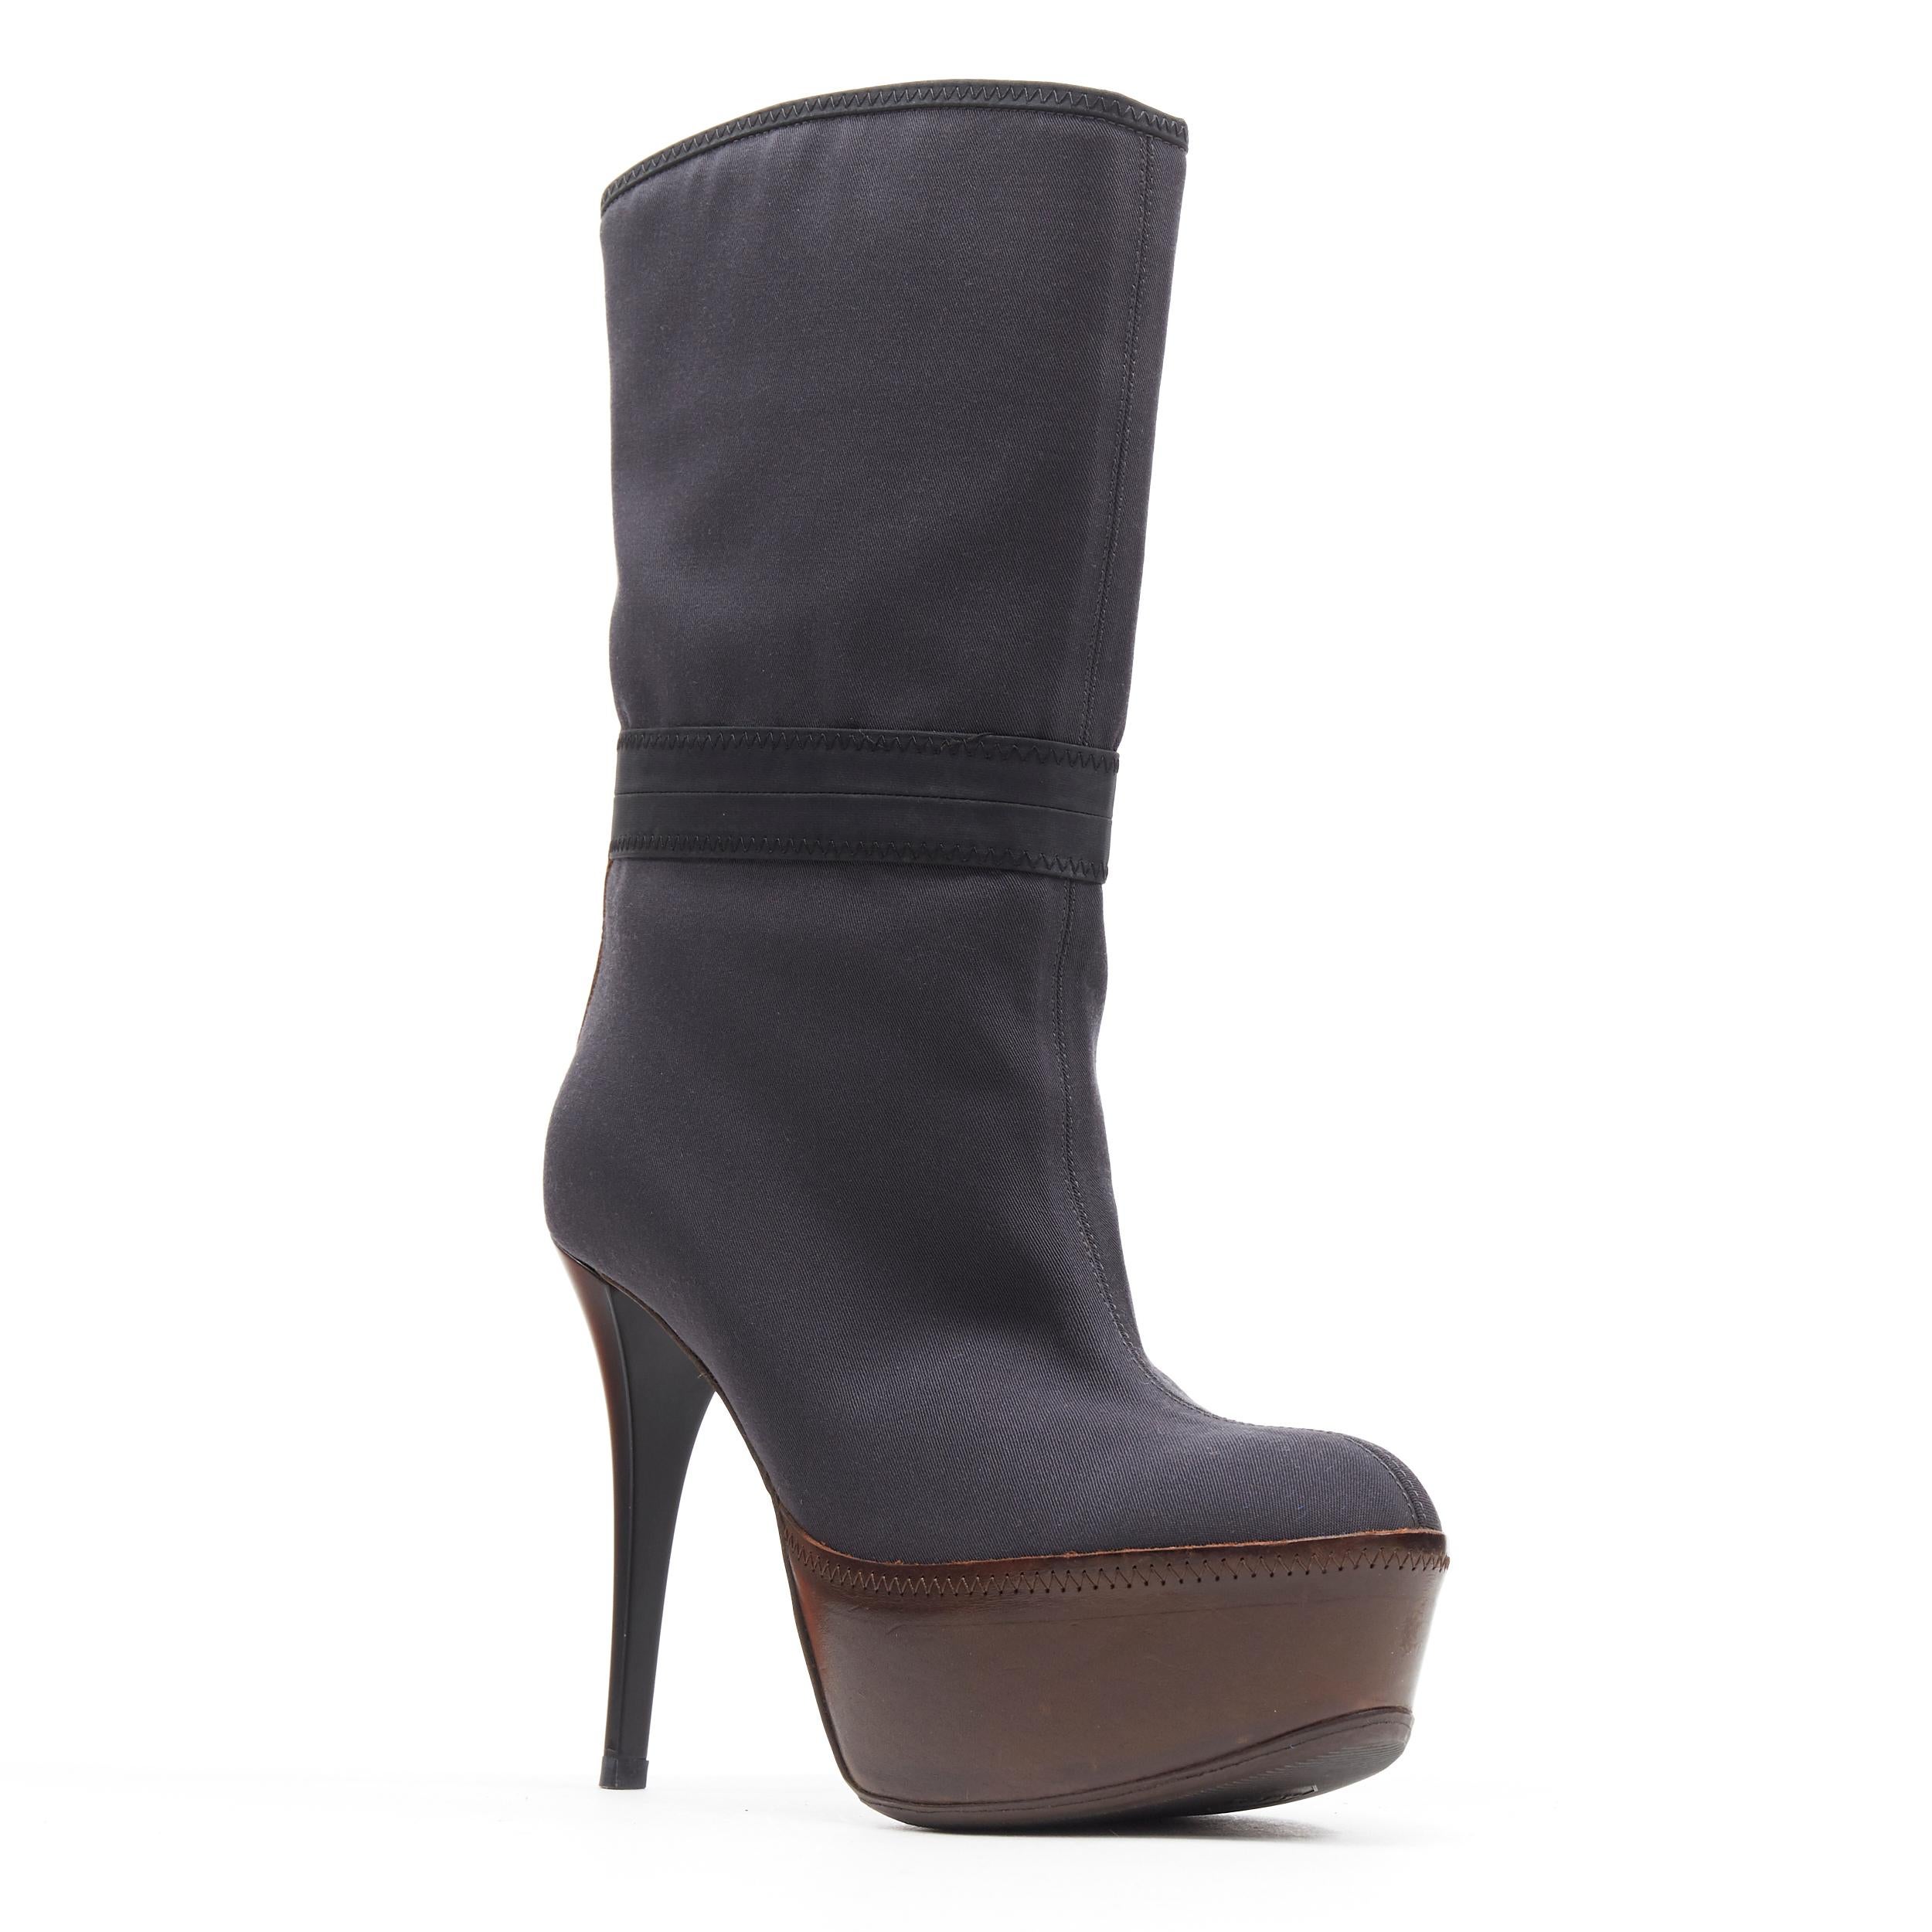 MARNI grey fabric upper brown leather platform round toe high heel boot EU36
Brand: Marni
Model Name / Style: Platfom boot
Material: Fabric
Color: Grey
Pattern: Solid
Closure: Pull on
Extra Detail: Ultra High (4 in & Higher) heel height. Almond toe.